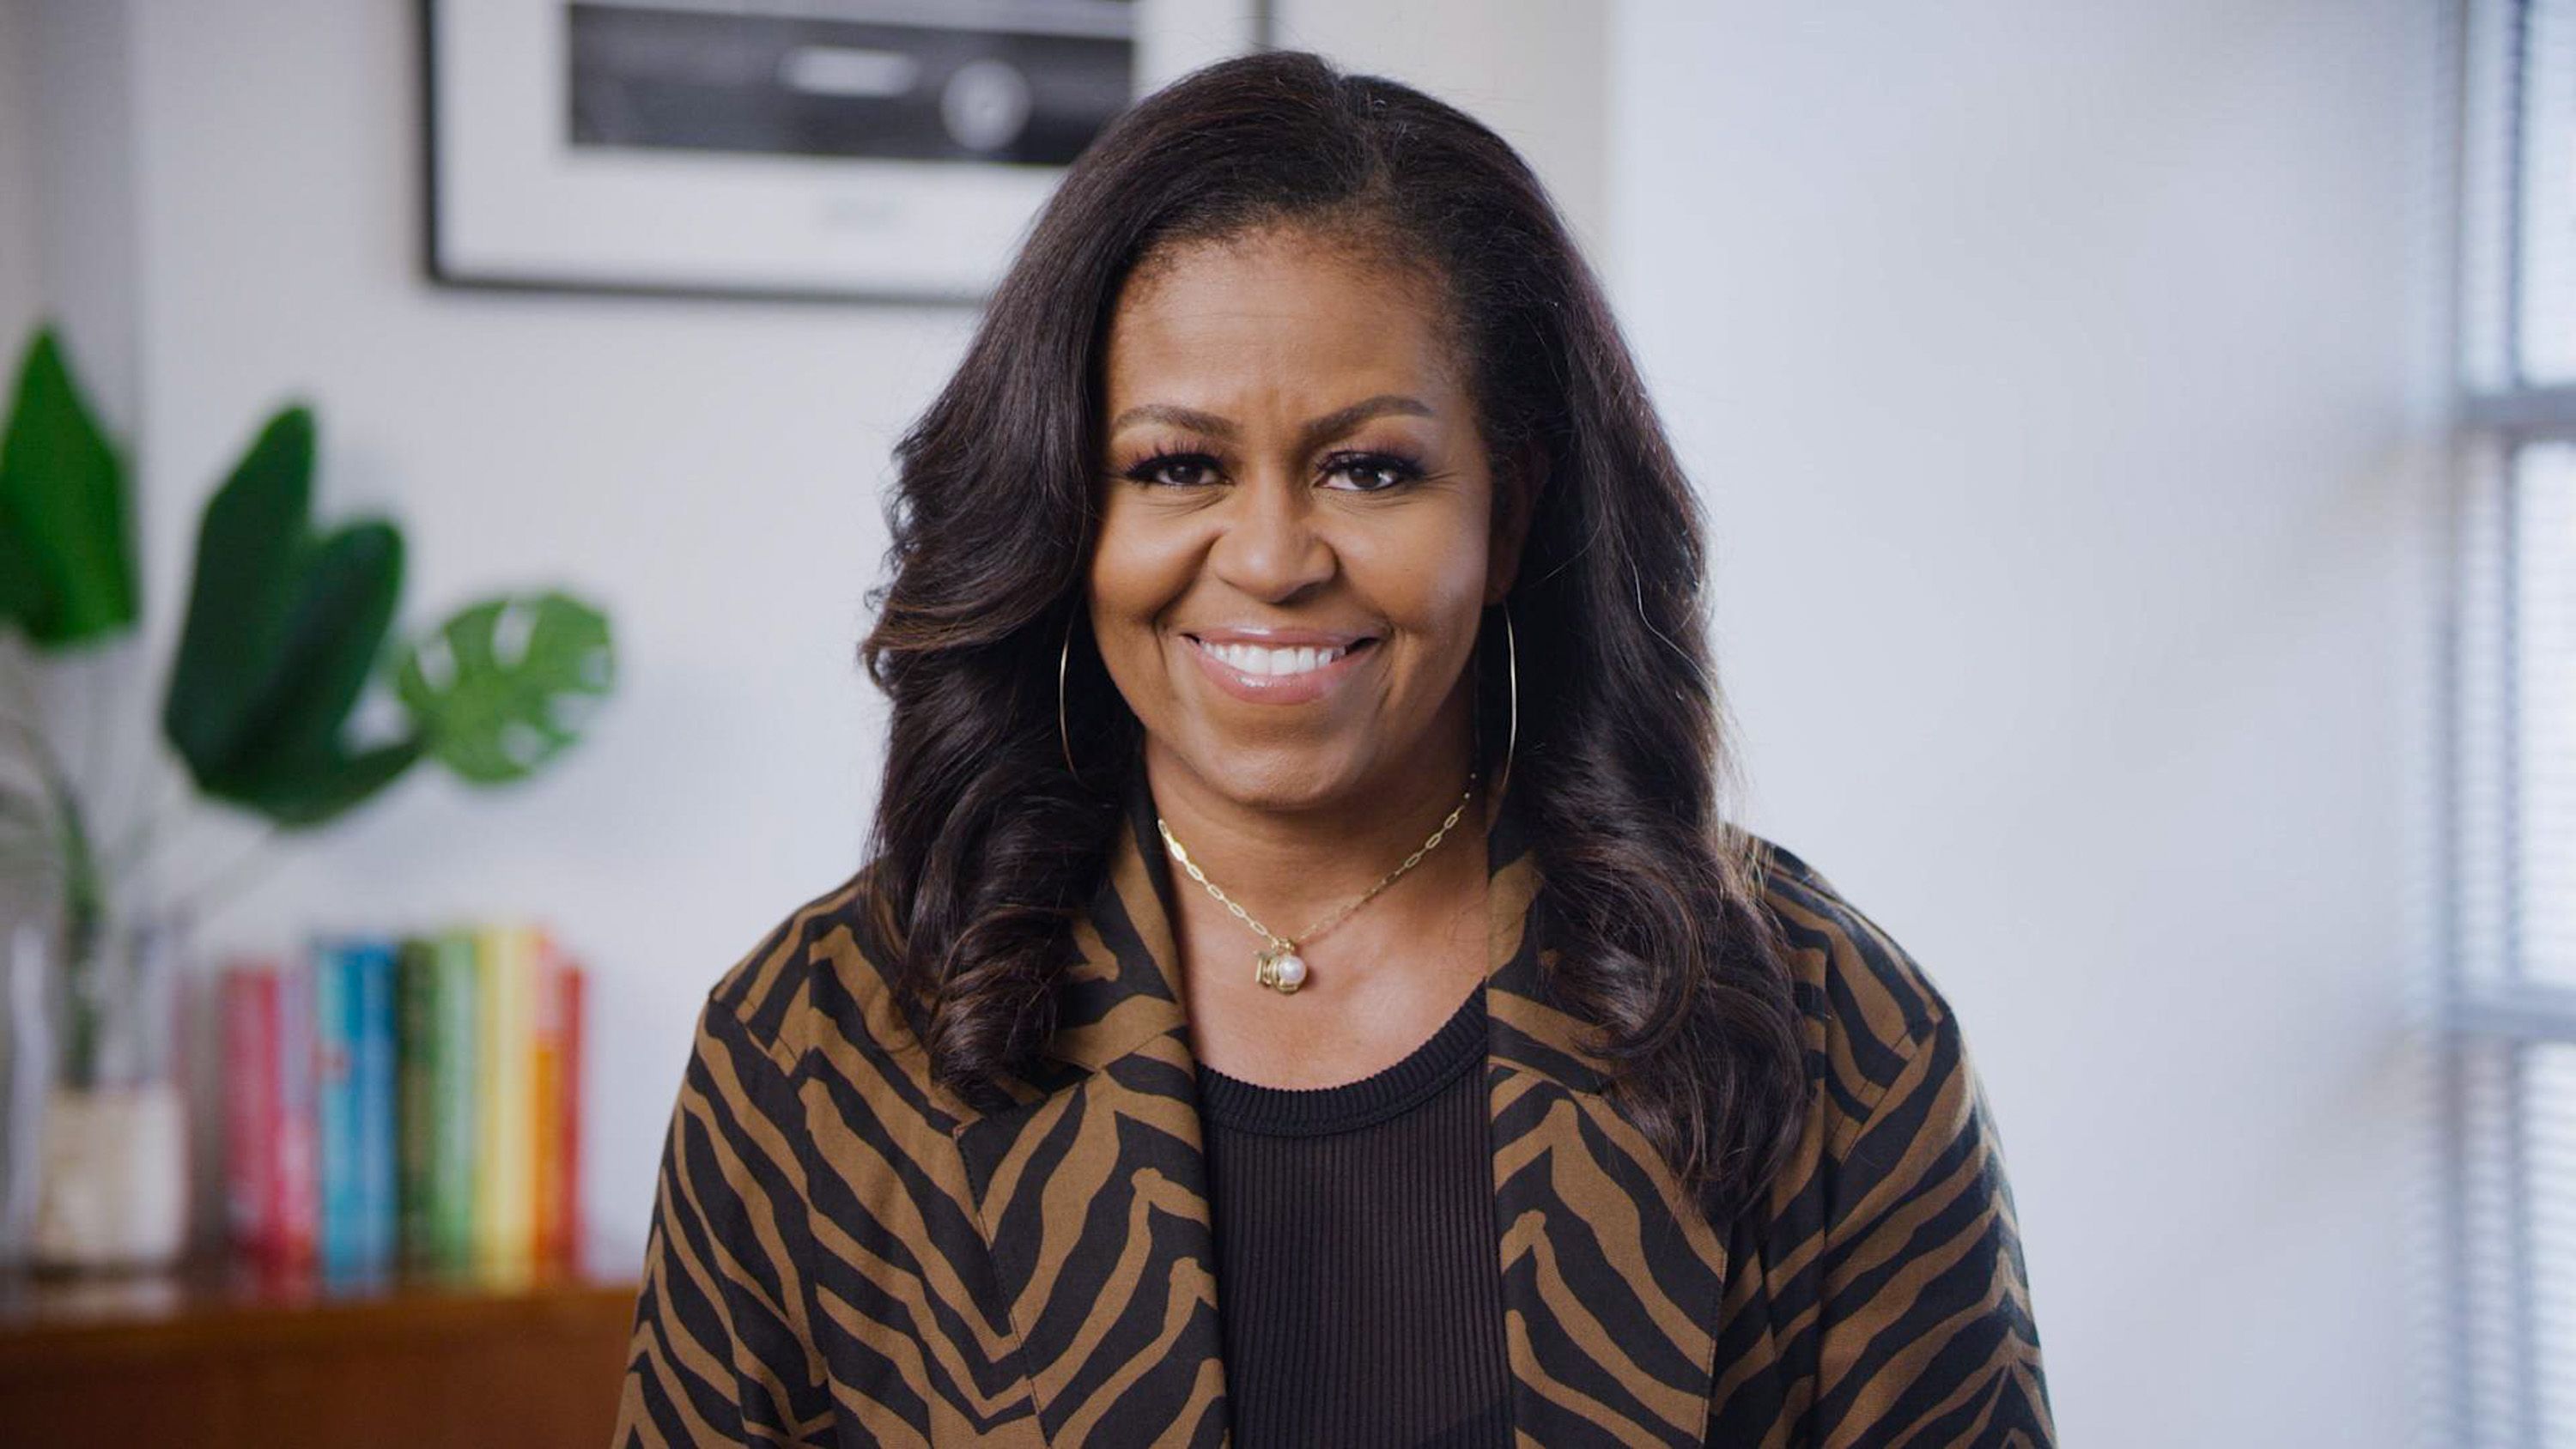 Michelle Obama on the NBC special "Roll up your sleeves," designed to encourage Americans to get vaccinated against COVID-19.